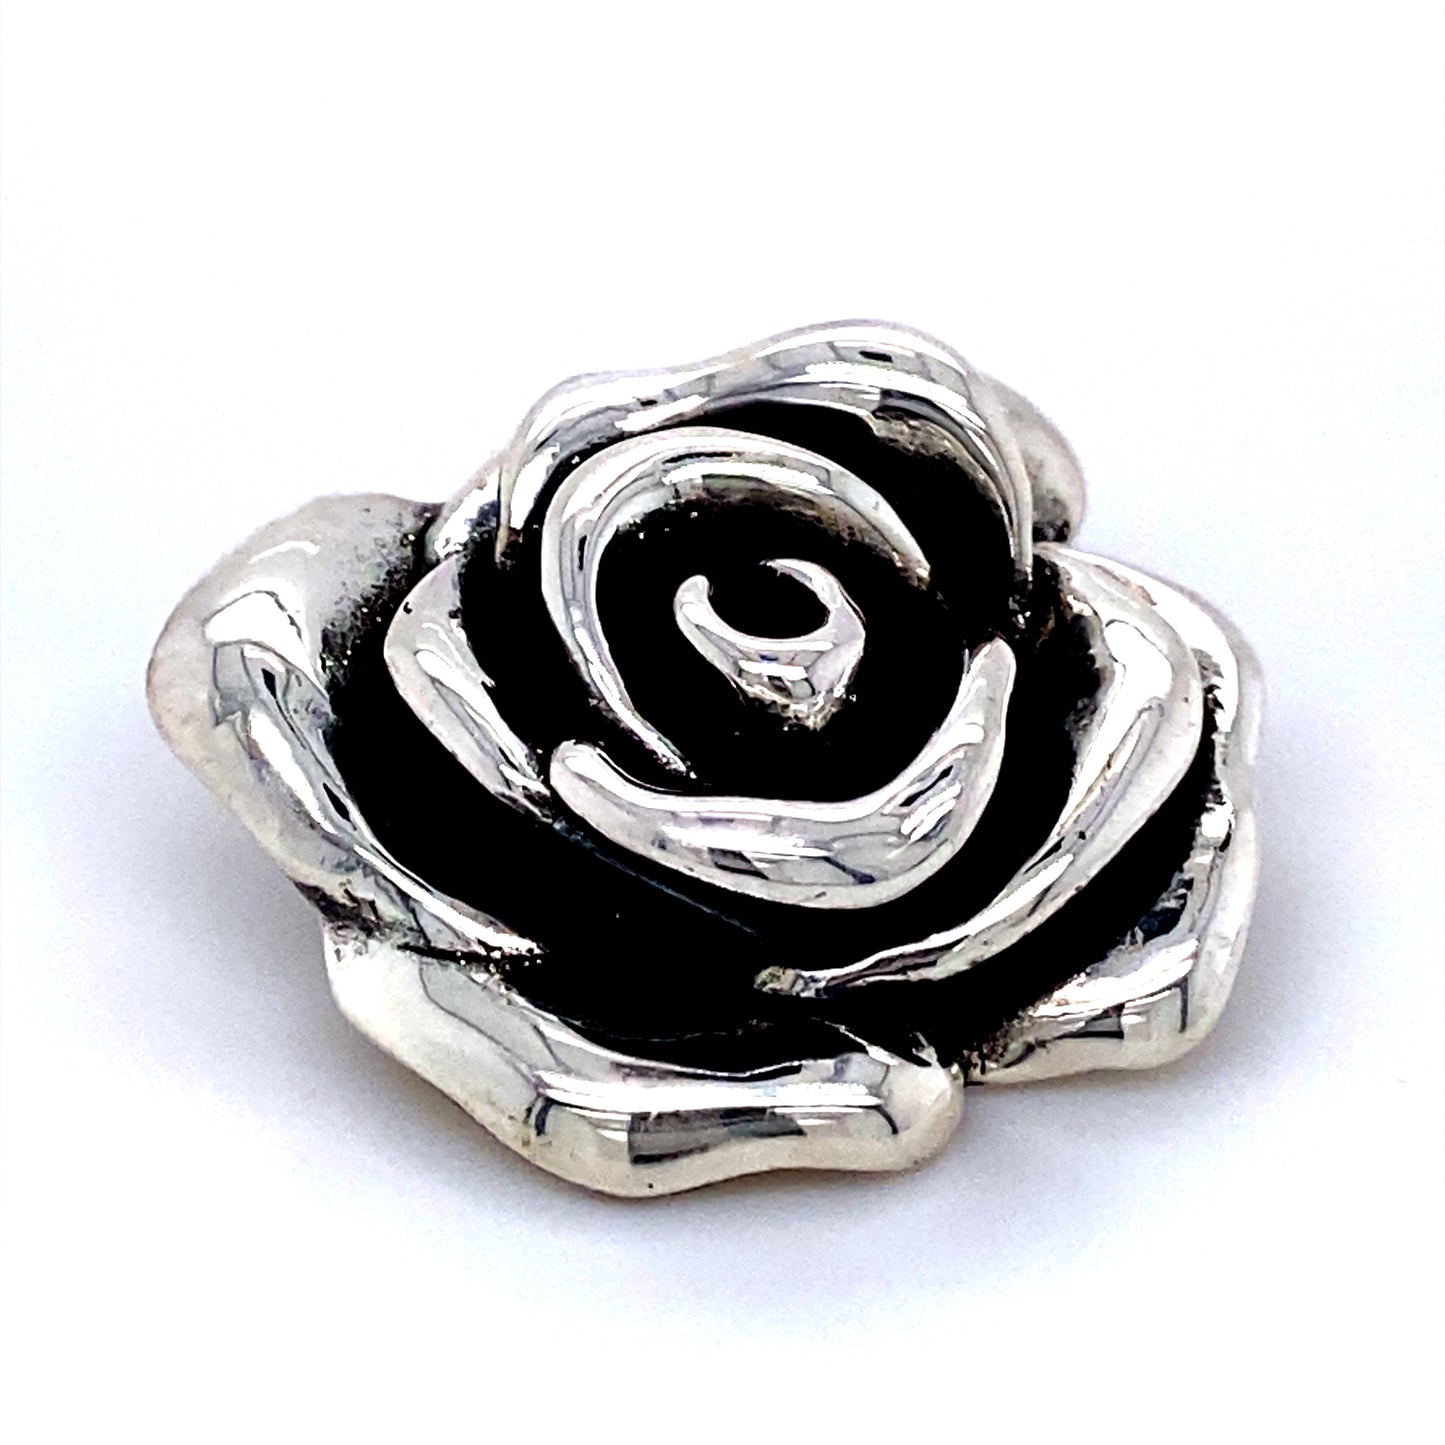 A Super Silver Stunning Electroformed Rose Pendant/Brooch on a white background.